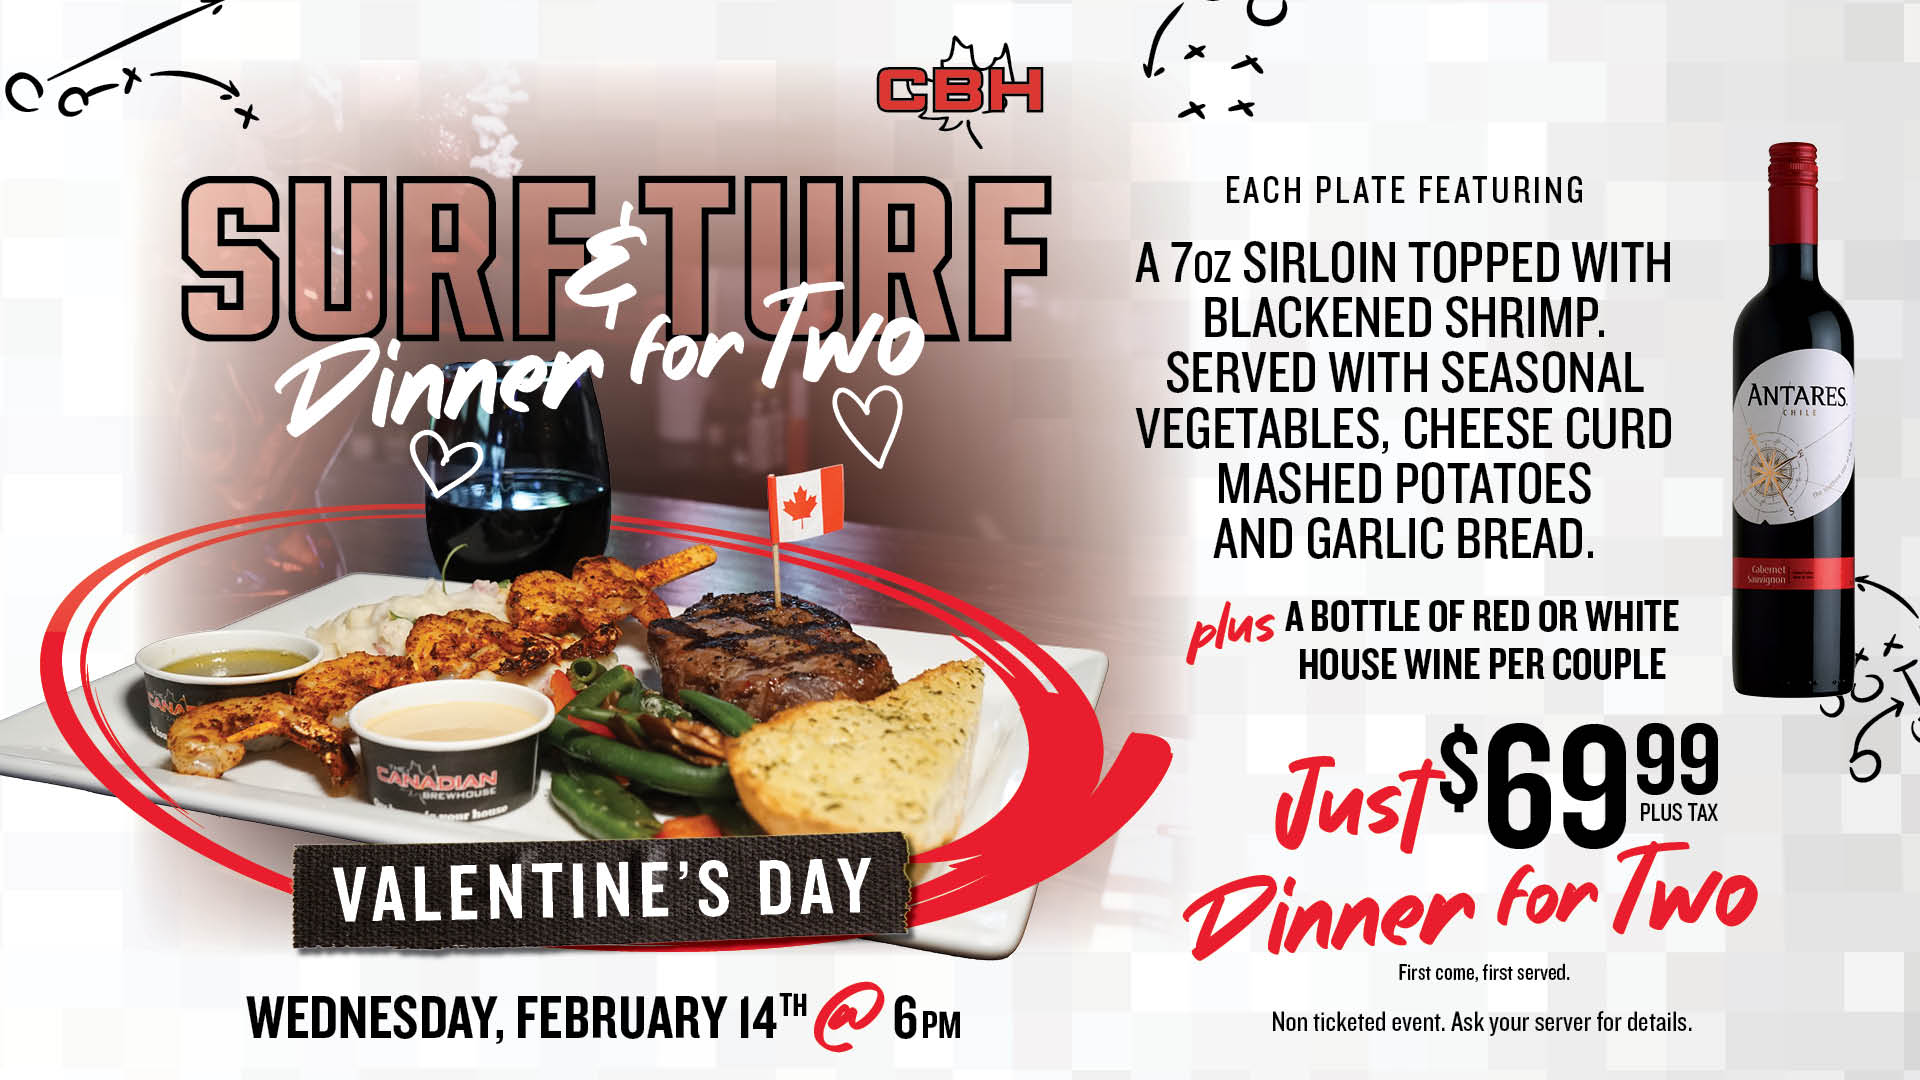 CBH Surf & Turf Dinner for Two - Valentine's Day. Wednesday, February 14th at 6pm - Each plate featuring a 7oz sirloin topped with blackened shrimp. Served with seasonal vegetables, cheese curd mashed potatoes and garlic bread. plus a bottle of red or white house wine per couple. Just 69.99 plus tax - Dinner for two!